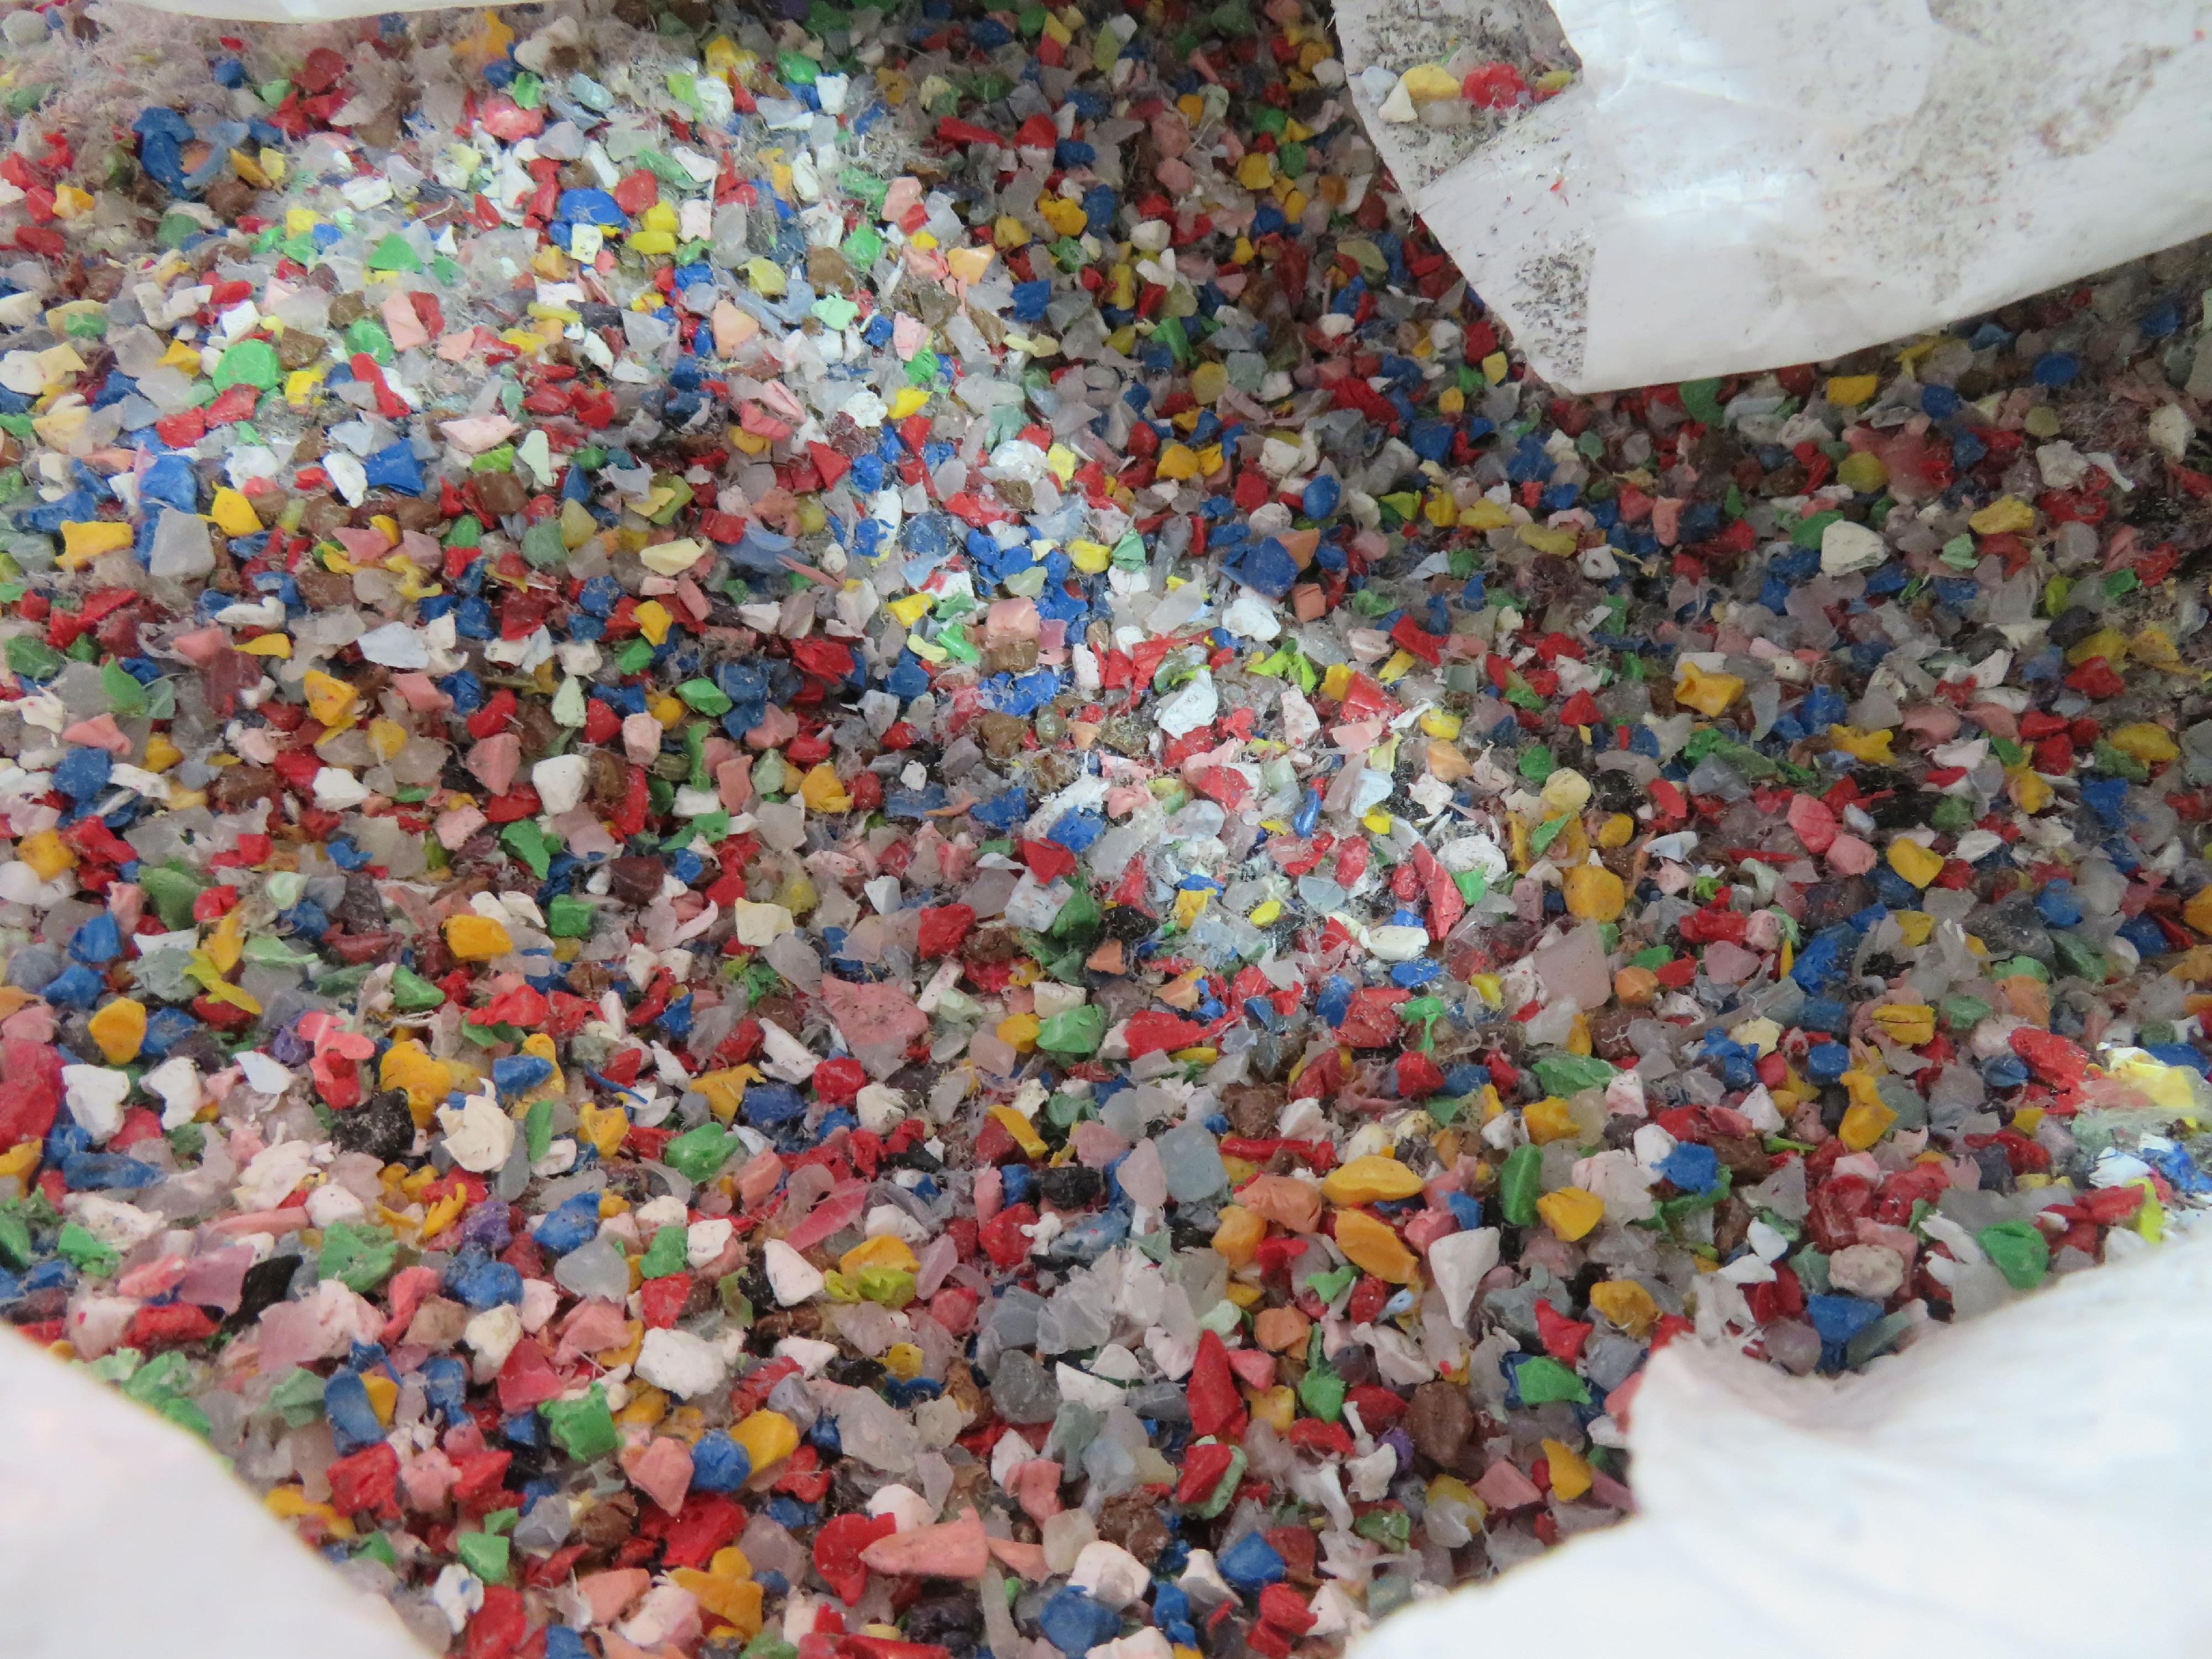 The Environmental Protection Department intercepted earlier a case of illegally imported regulated waste plastics from Germany at the COSCO-HIT Container Terminals. Photo shows some of the intercepted waste, which was mixed with a large quantity of different types of waste plastics. 